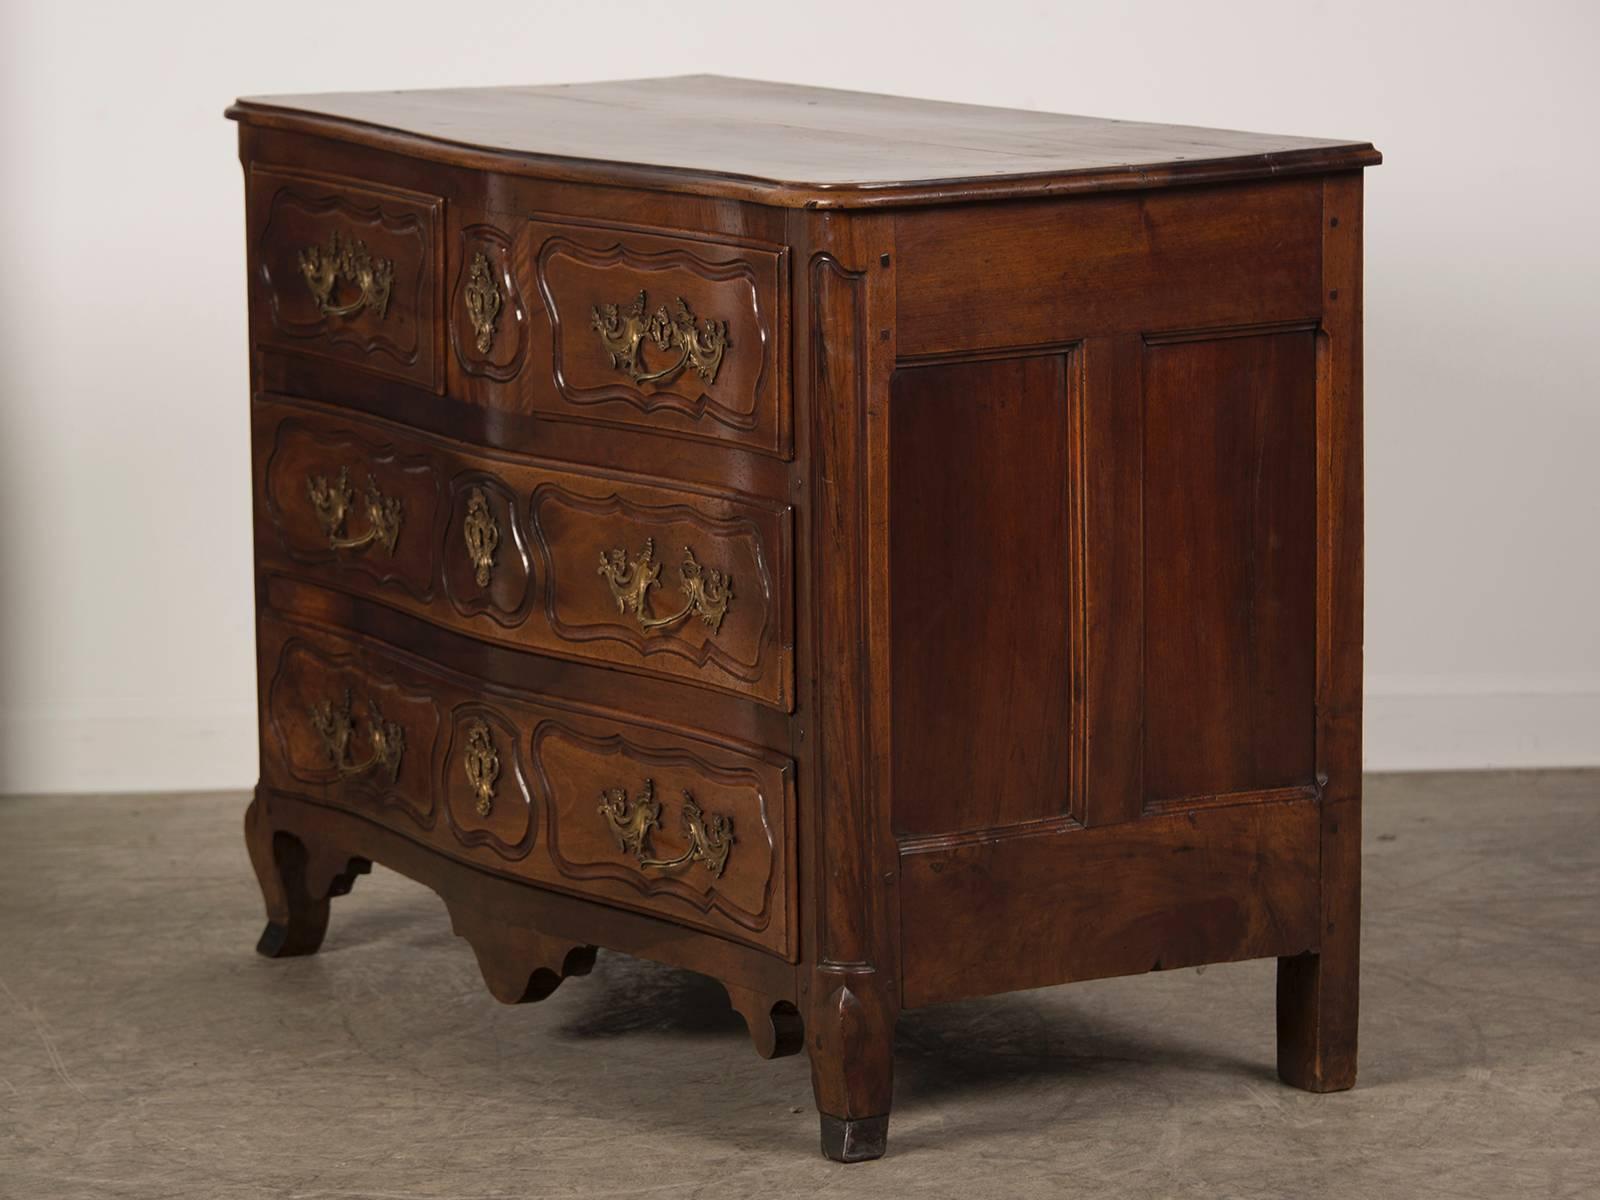 Louis XV Antique French Provençal Walnut Commode, Serpentine Façade circa 1750 In Excellent Condition For Sale In Houston, TX